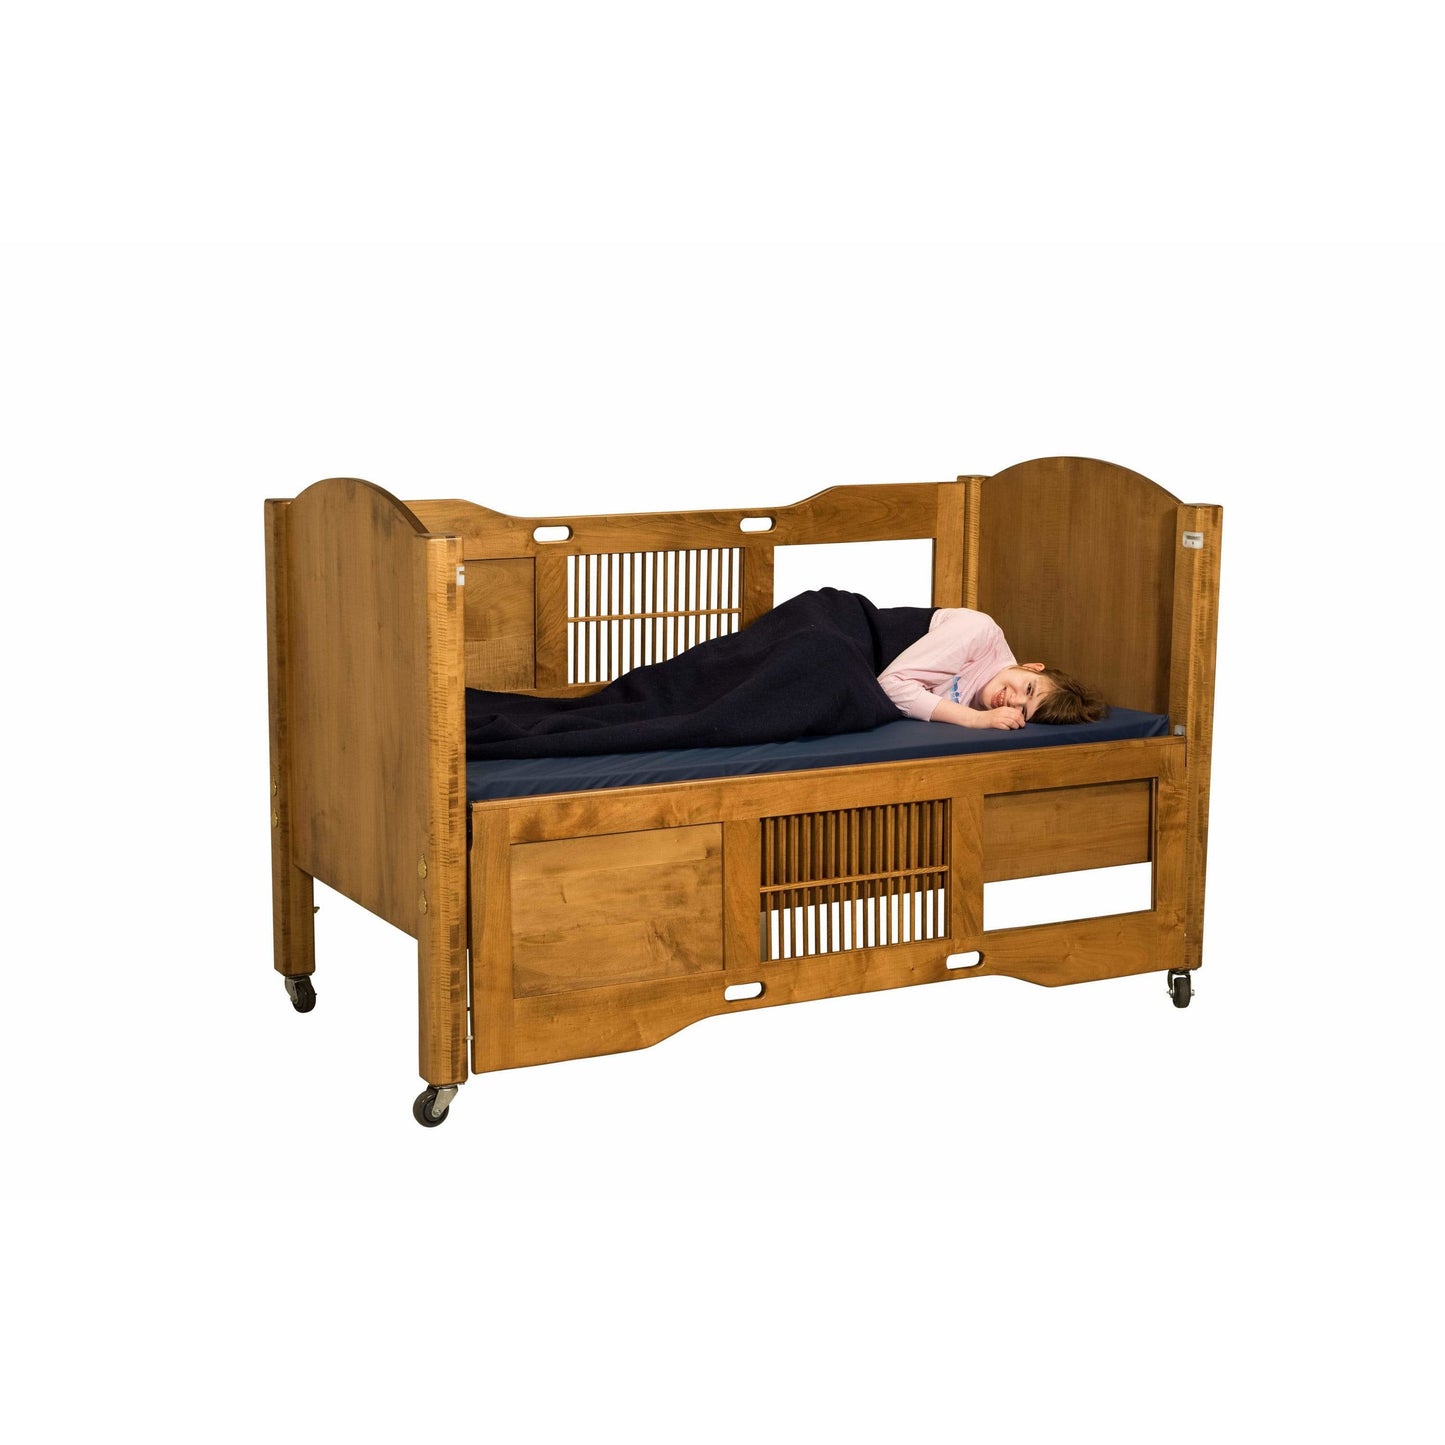 Beds by George Made to order Dream Series Manual Adjustable Head, Twin Size Bed - Standard BBG-1500